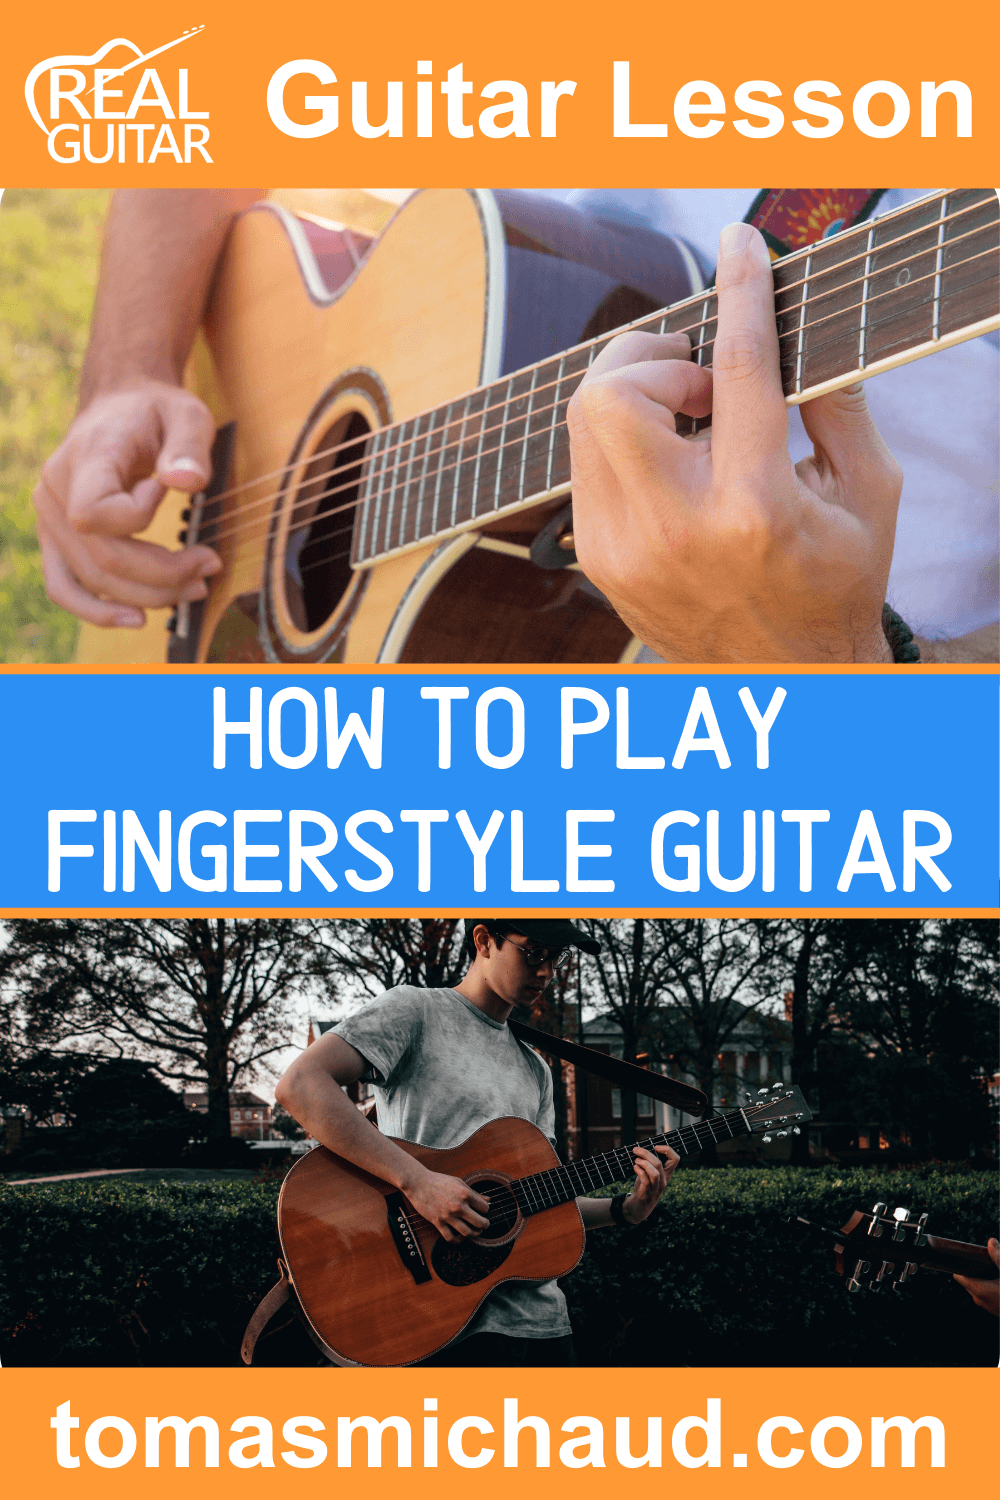 How To Play Fingerstyle Guitar